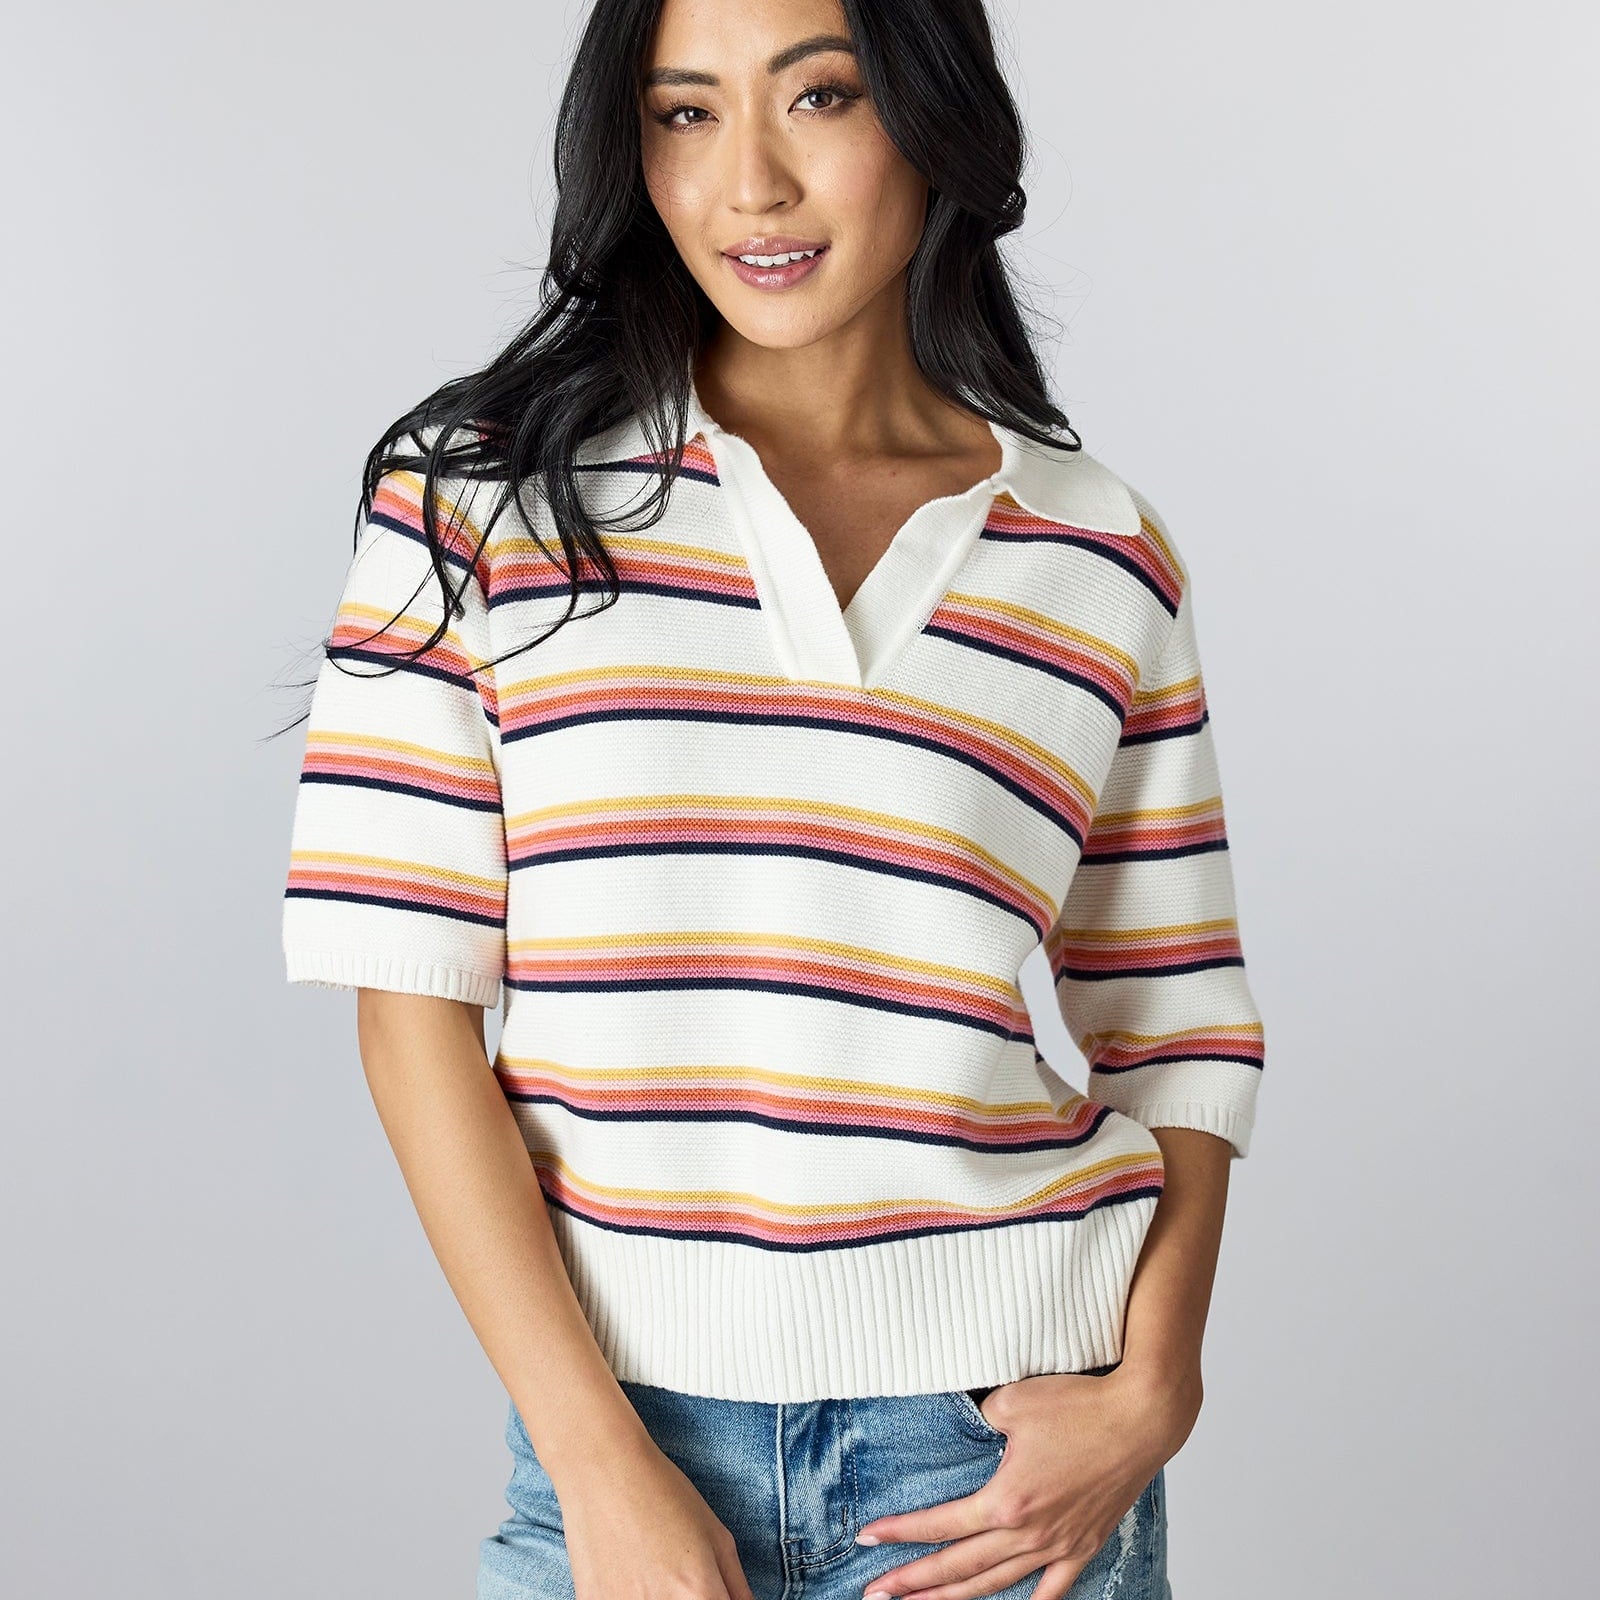 Woman in a half-sleeved, rainbow striped sweater with v-neck and collar.